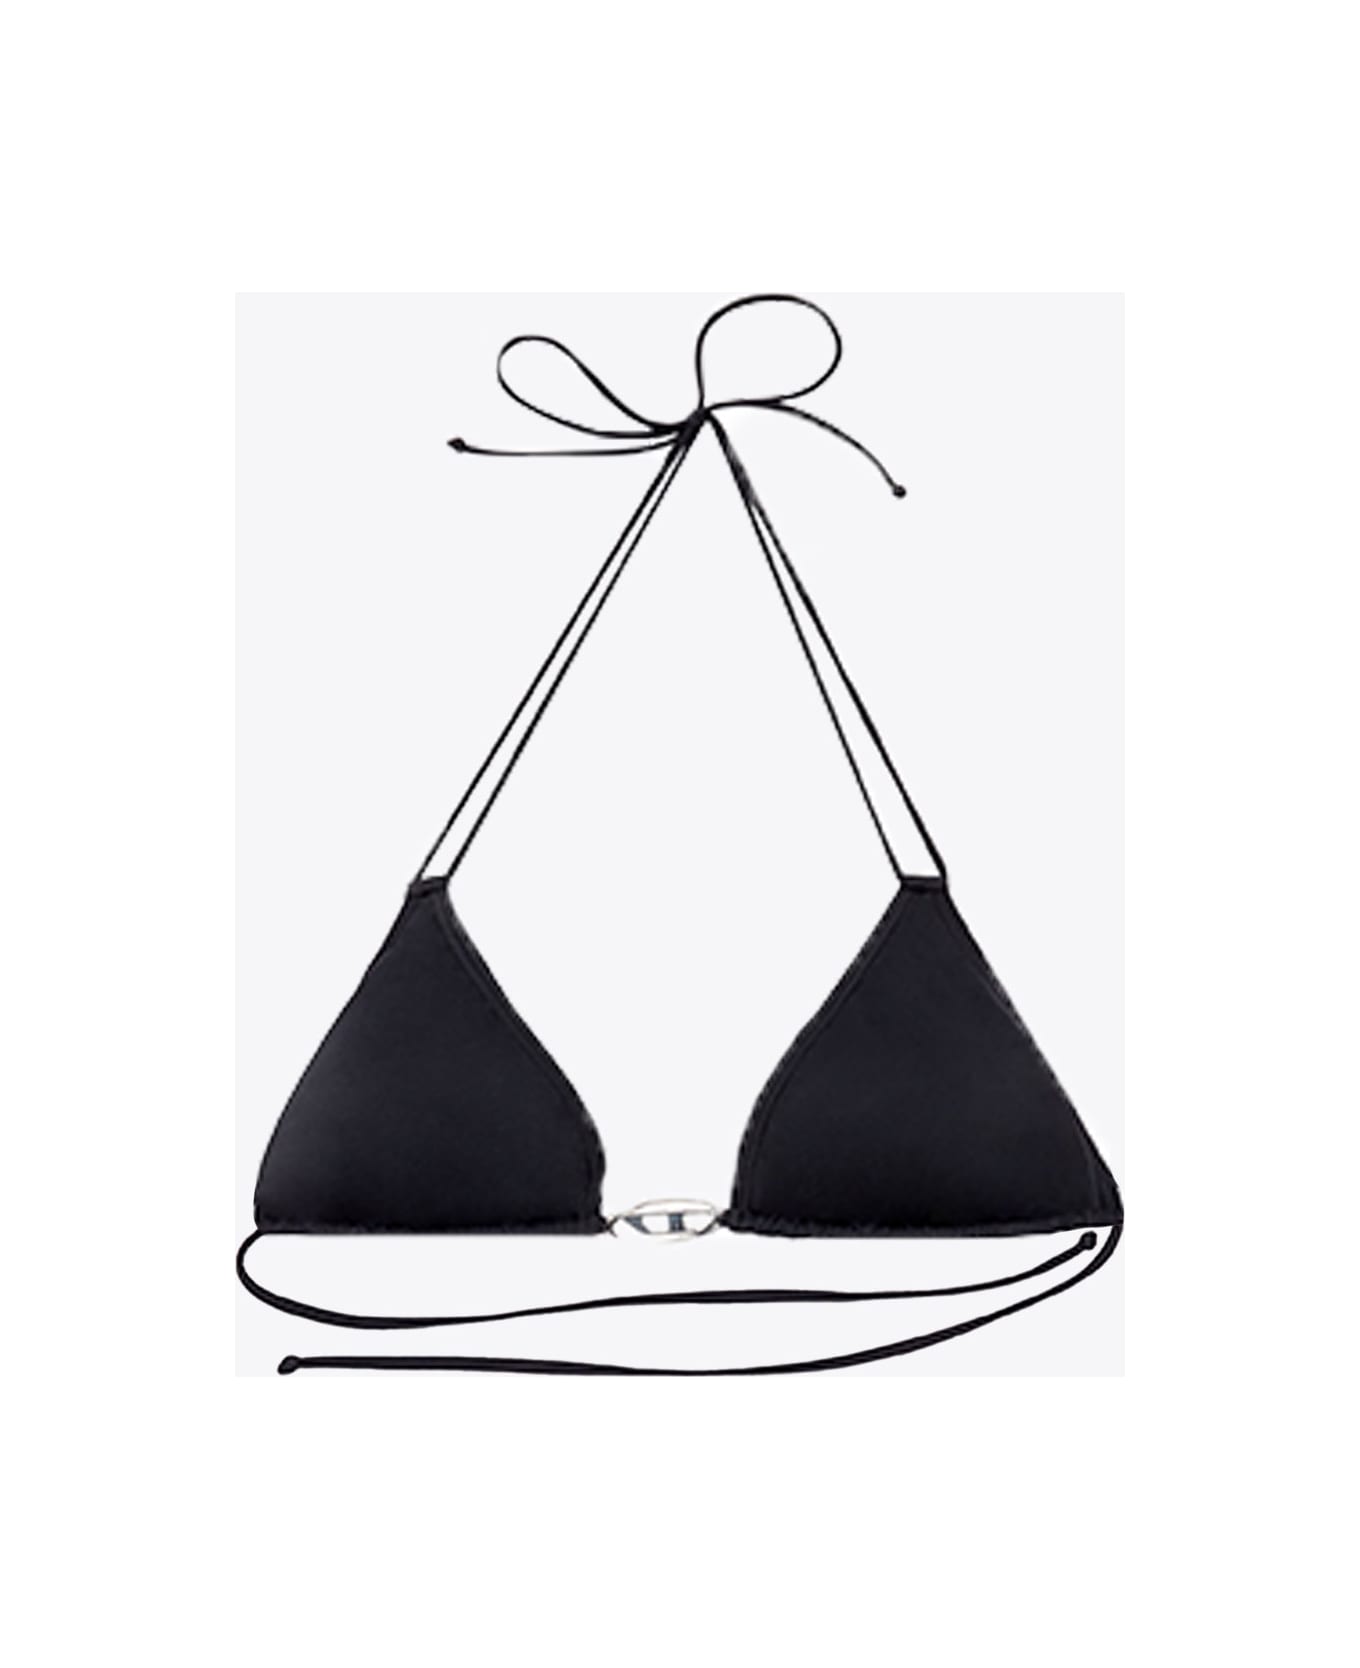 Diesel Bfb-sees-o Bikini top in balck lycra with metal Oval D - Bfb Sees O - Nero